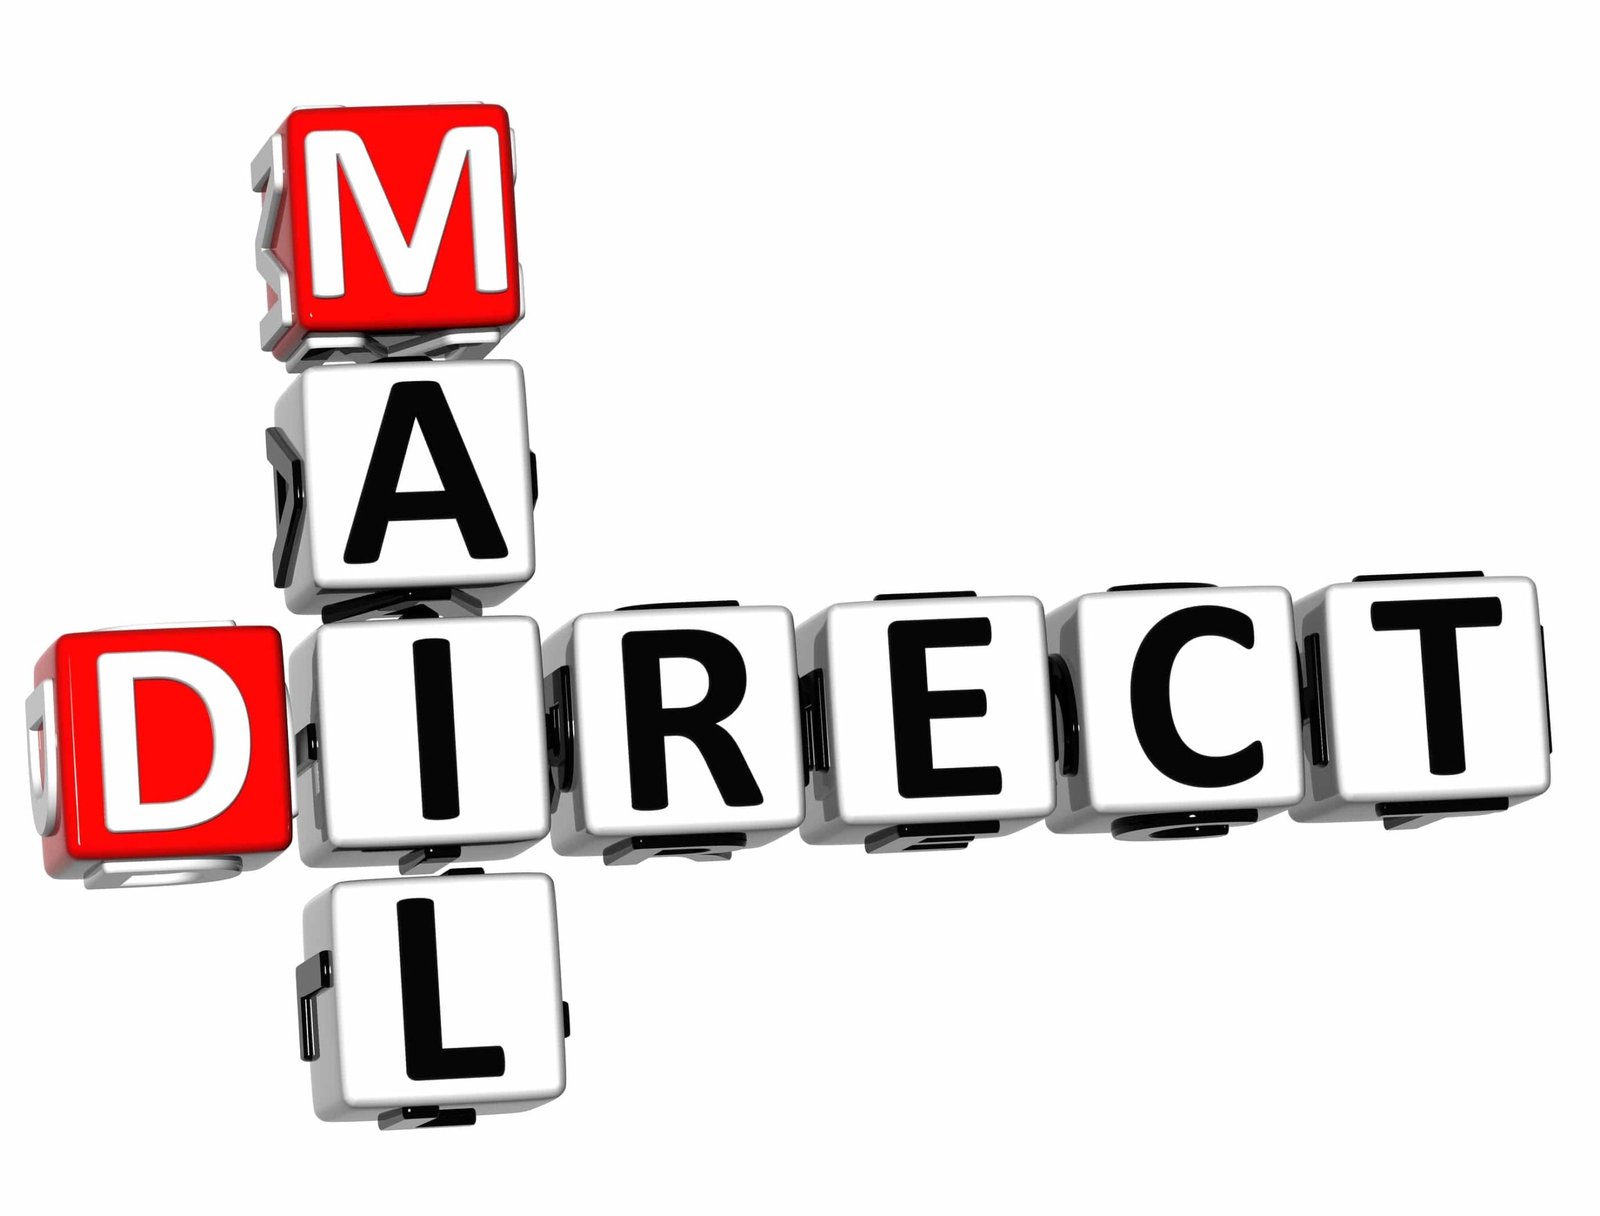 Getting fresh direct mail final expense leads is important.